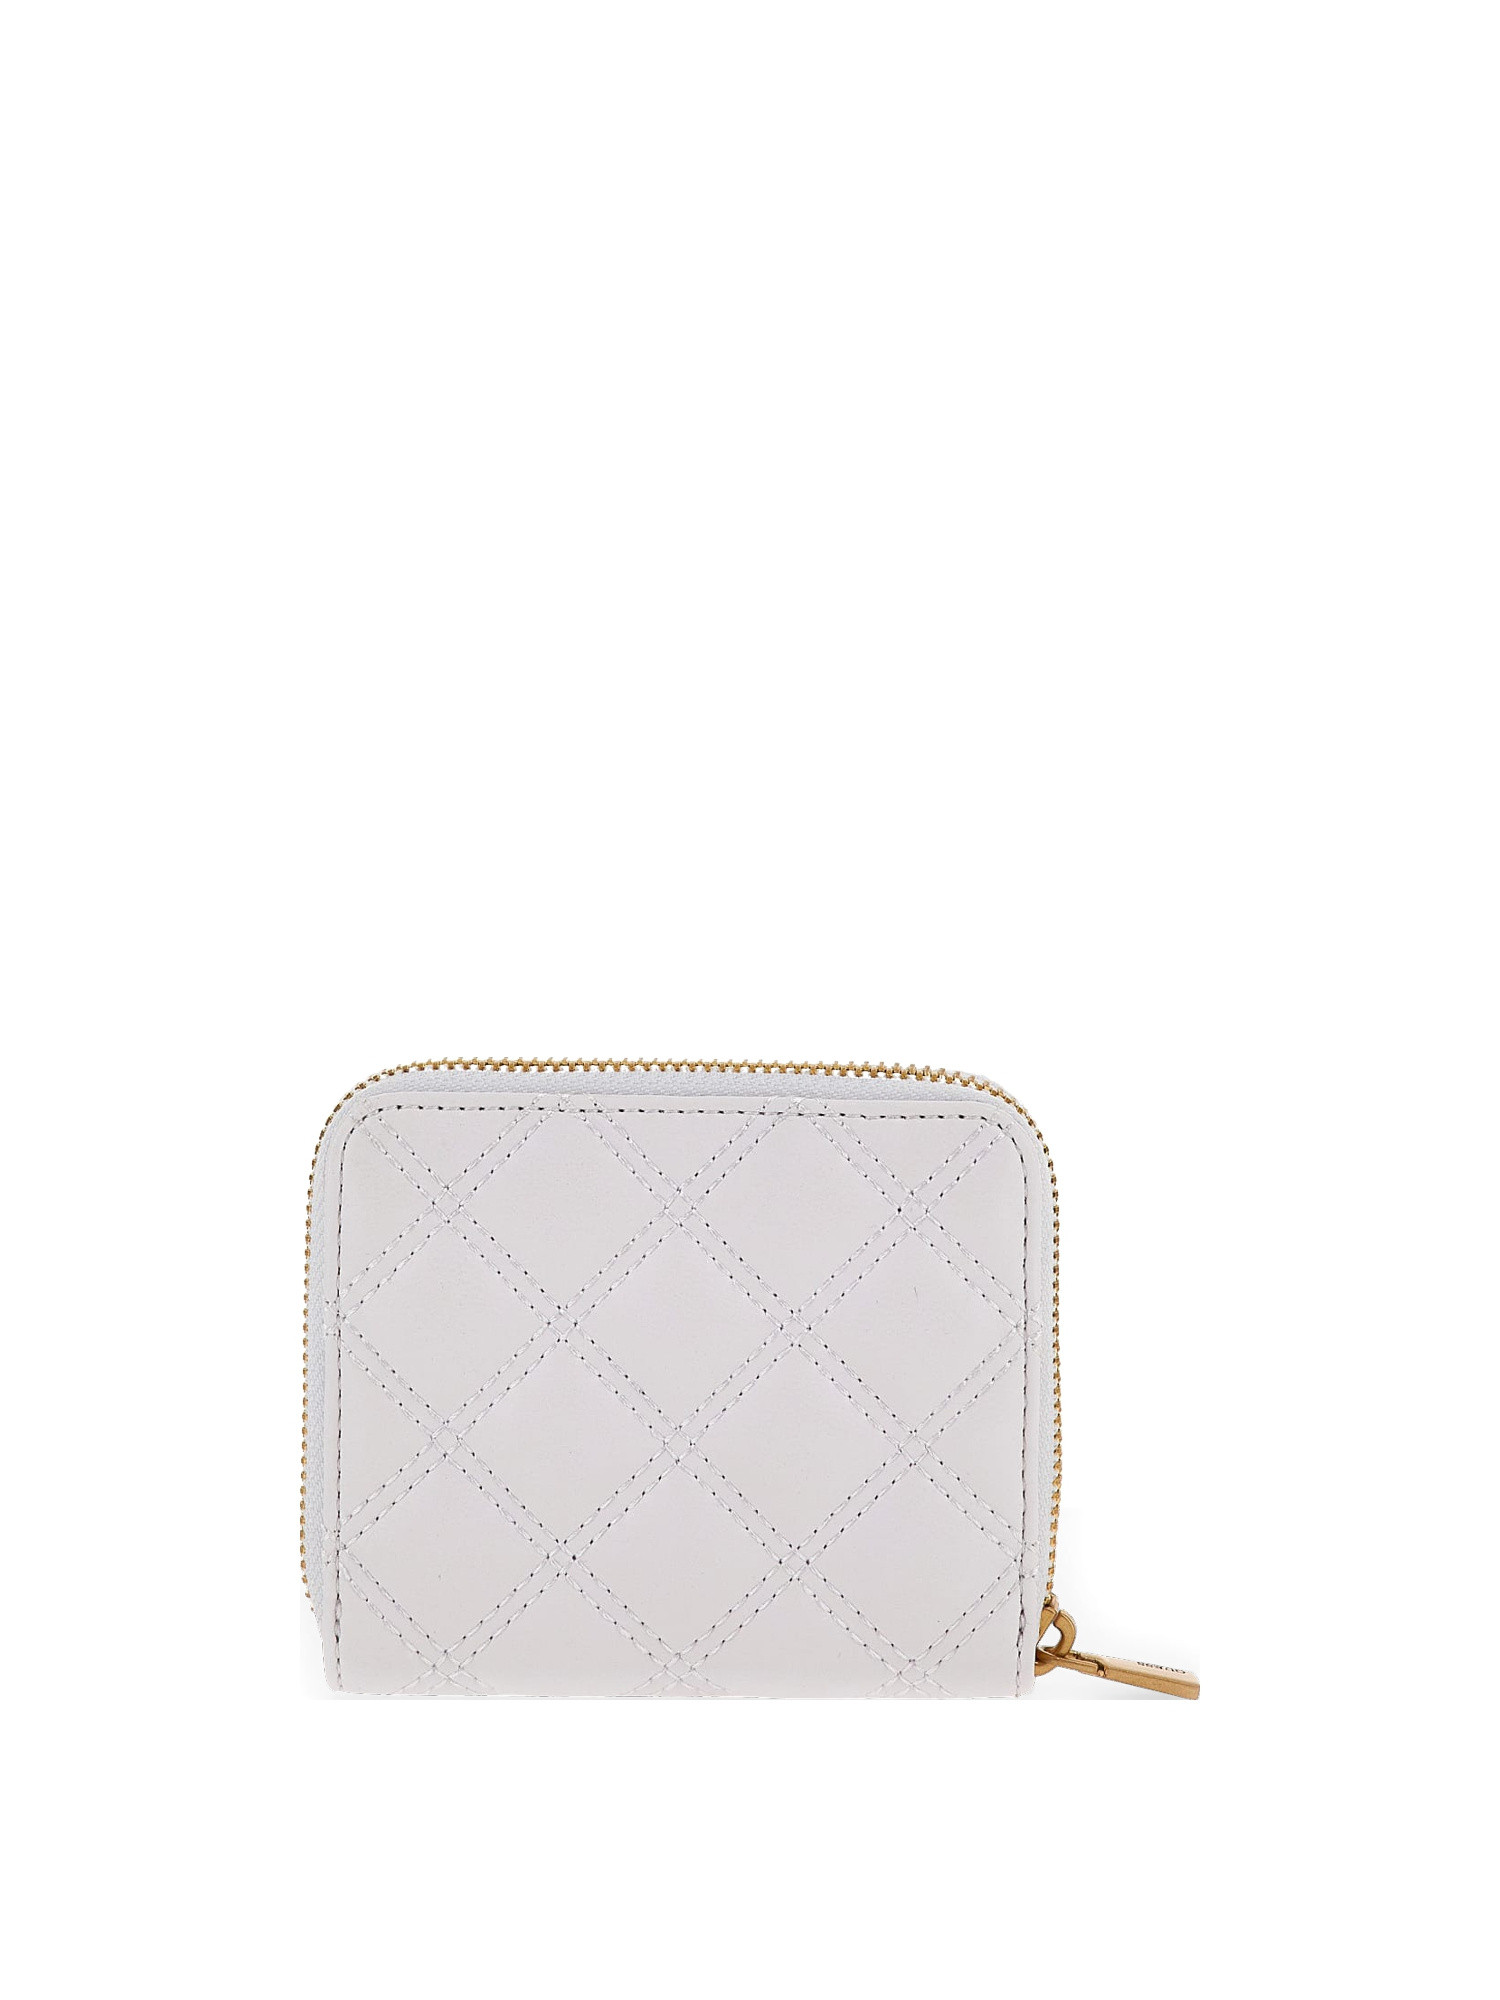 Guess - Giully quilted mini wallet, White, large image number 1